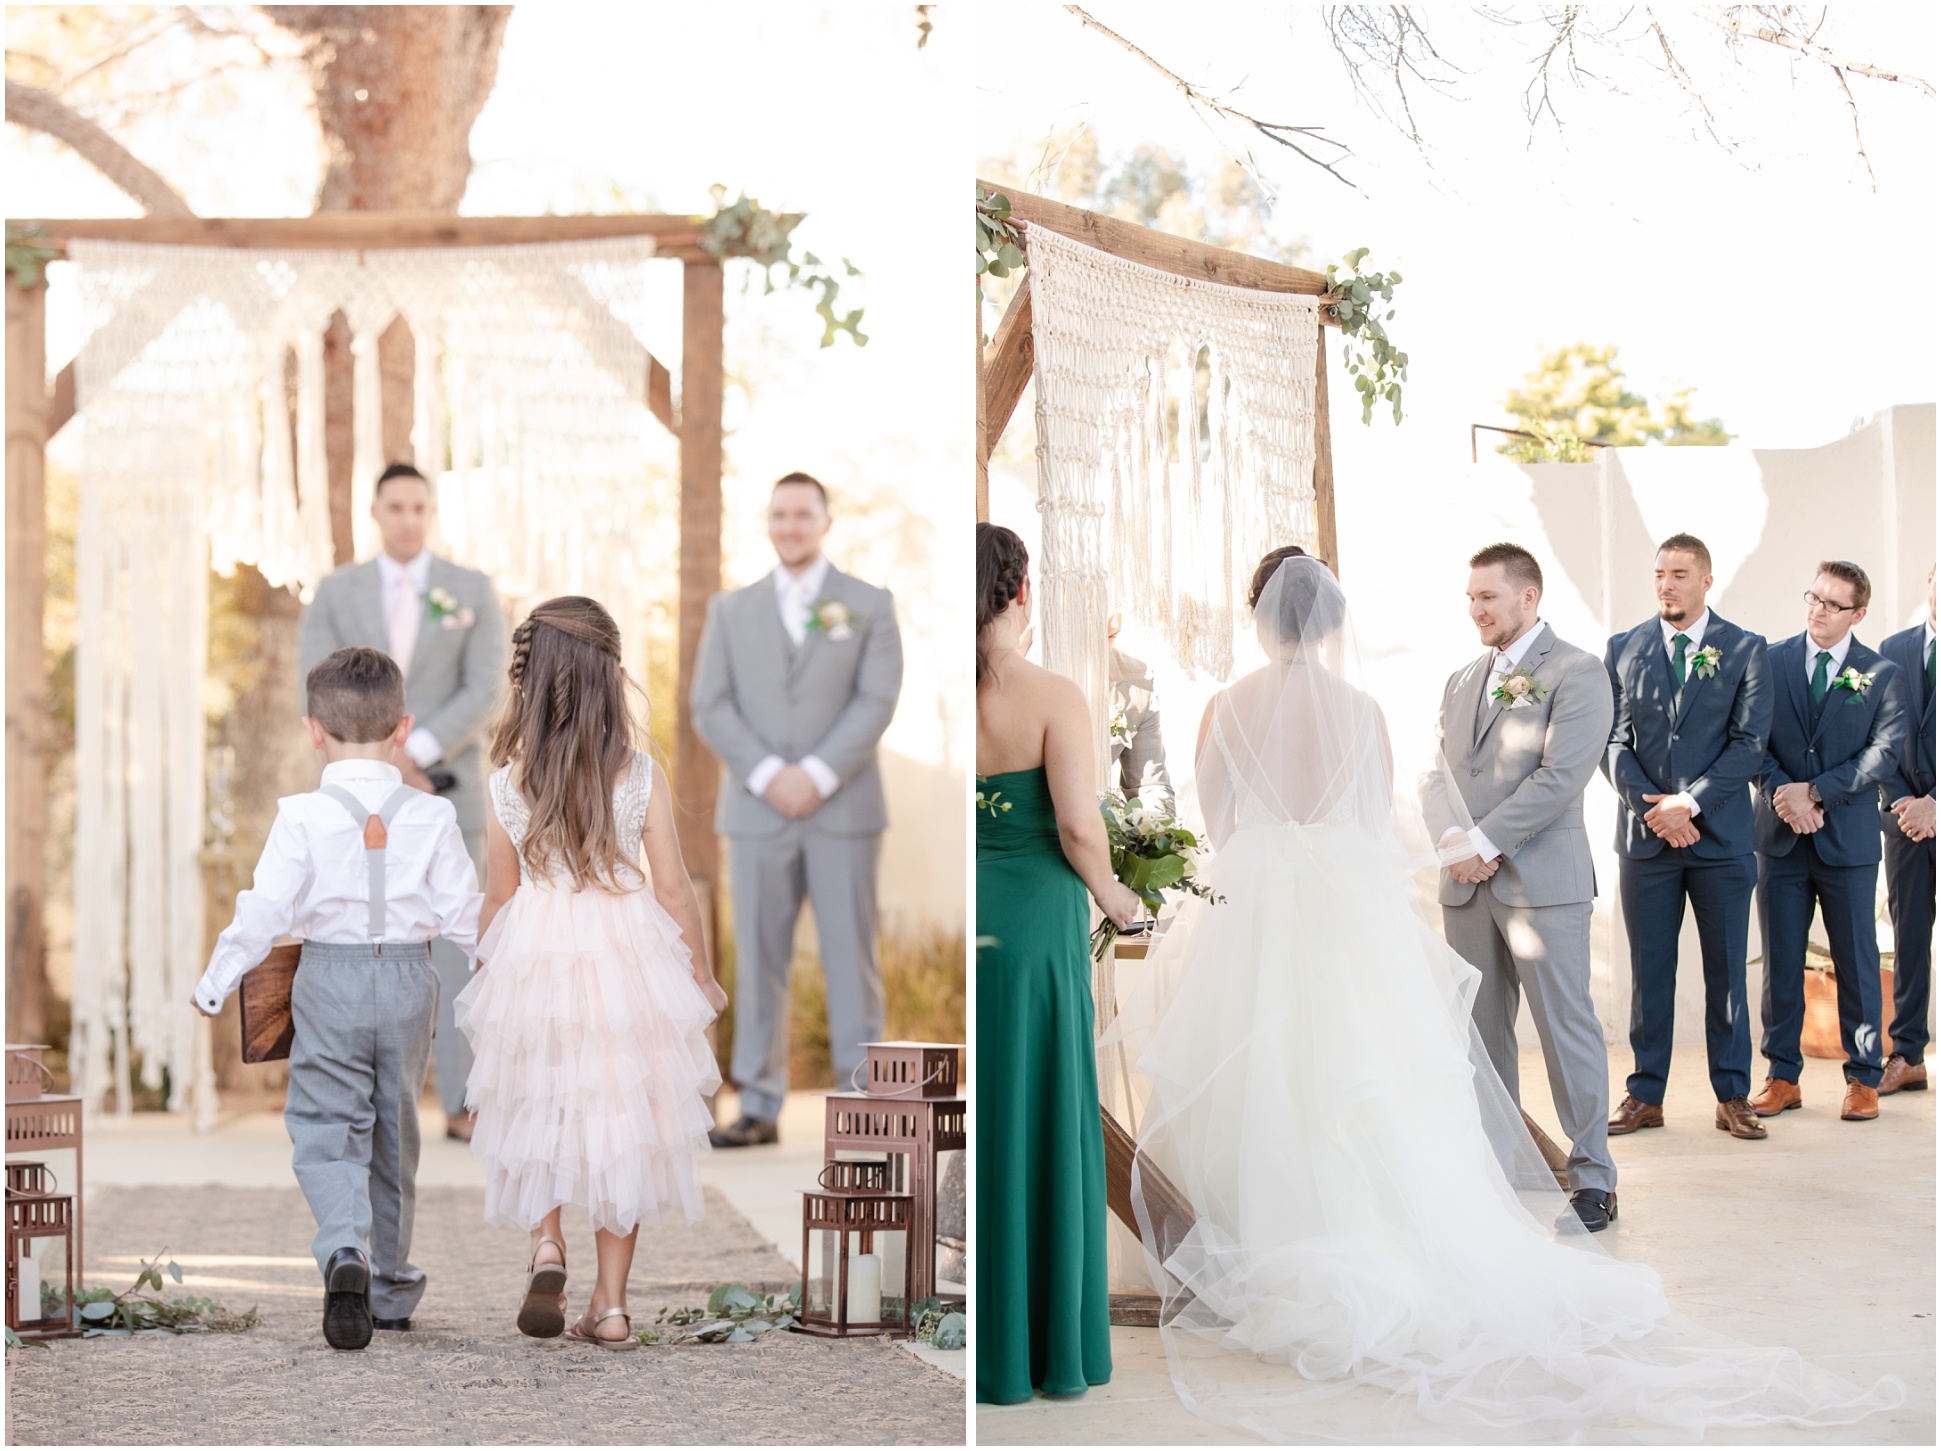 flower girl and ring bear walking down aisle, Bride and Groom arber 